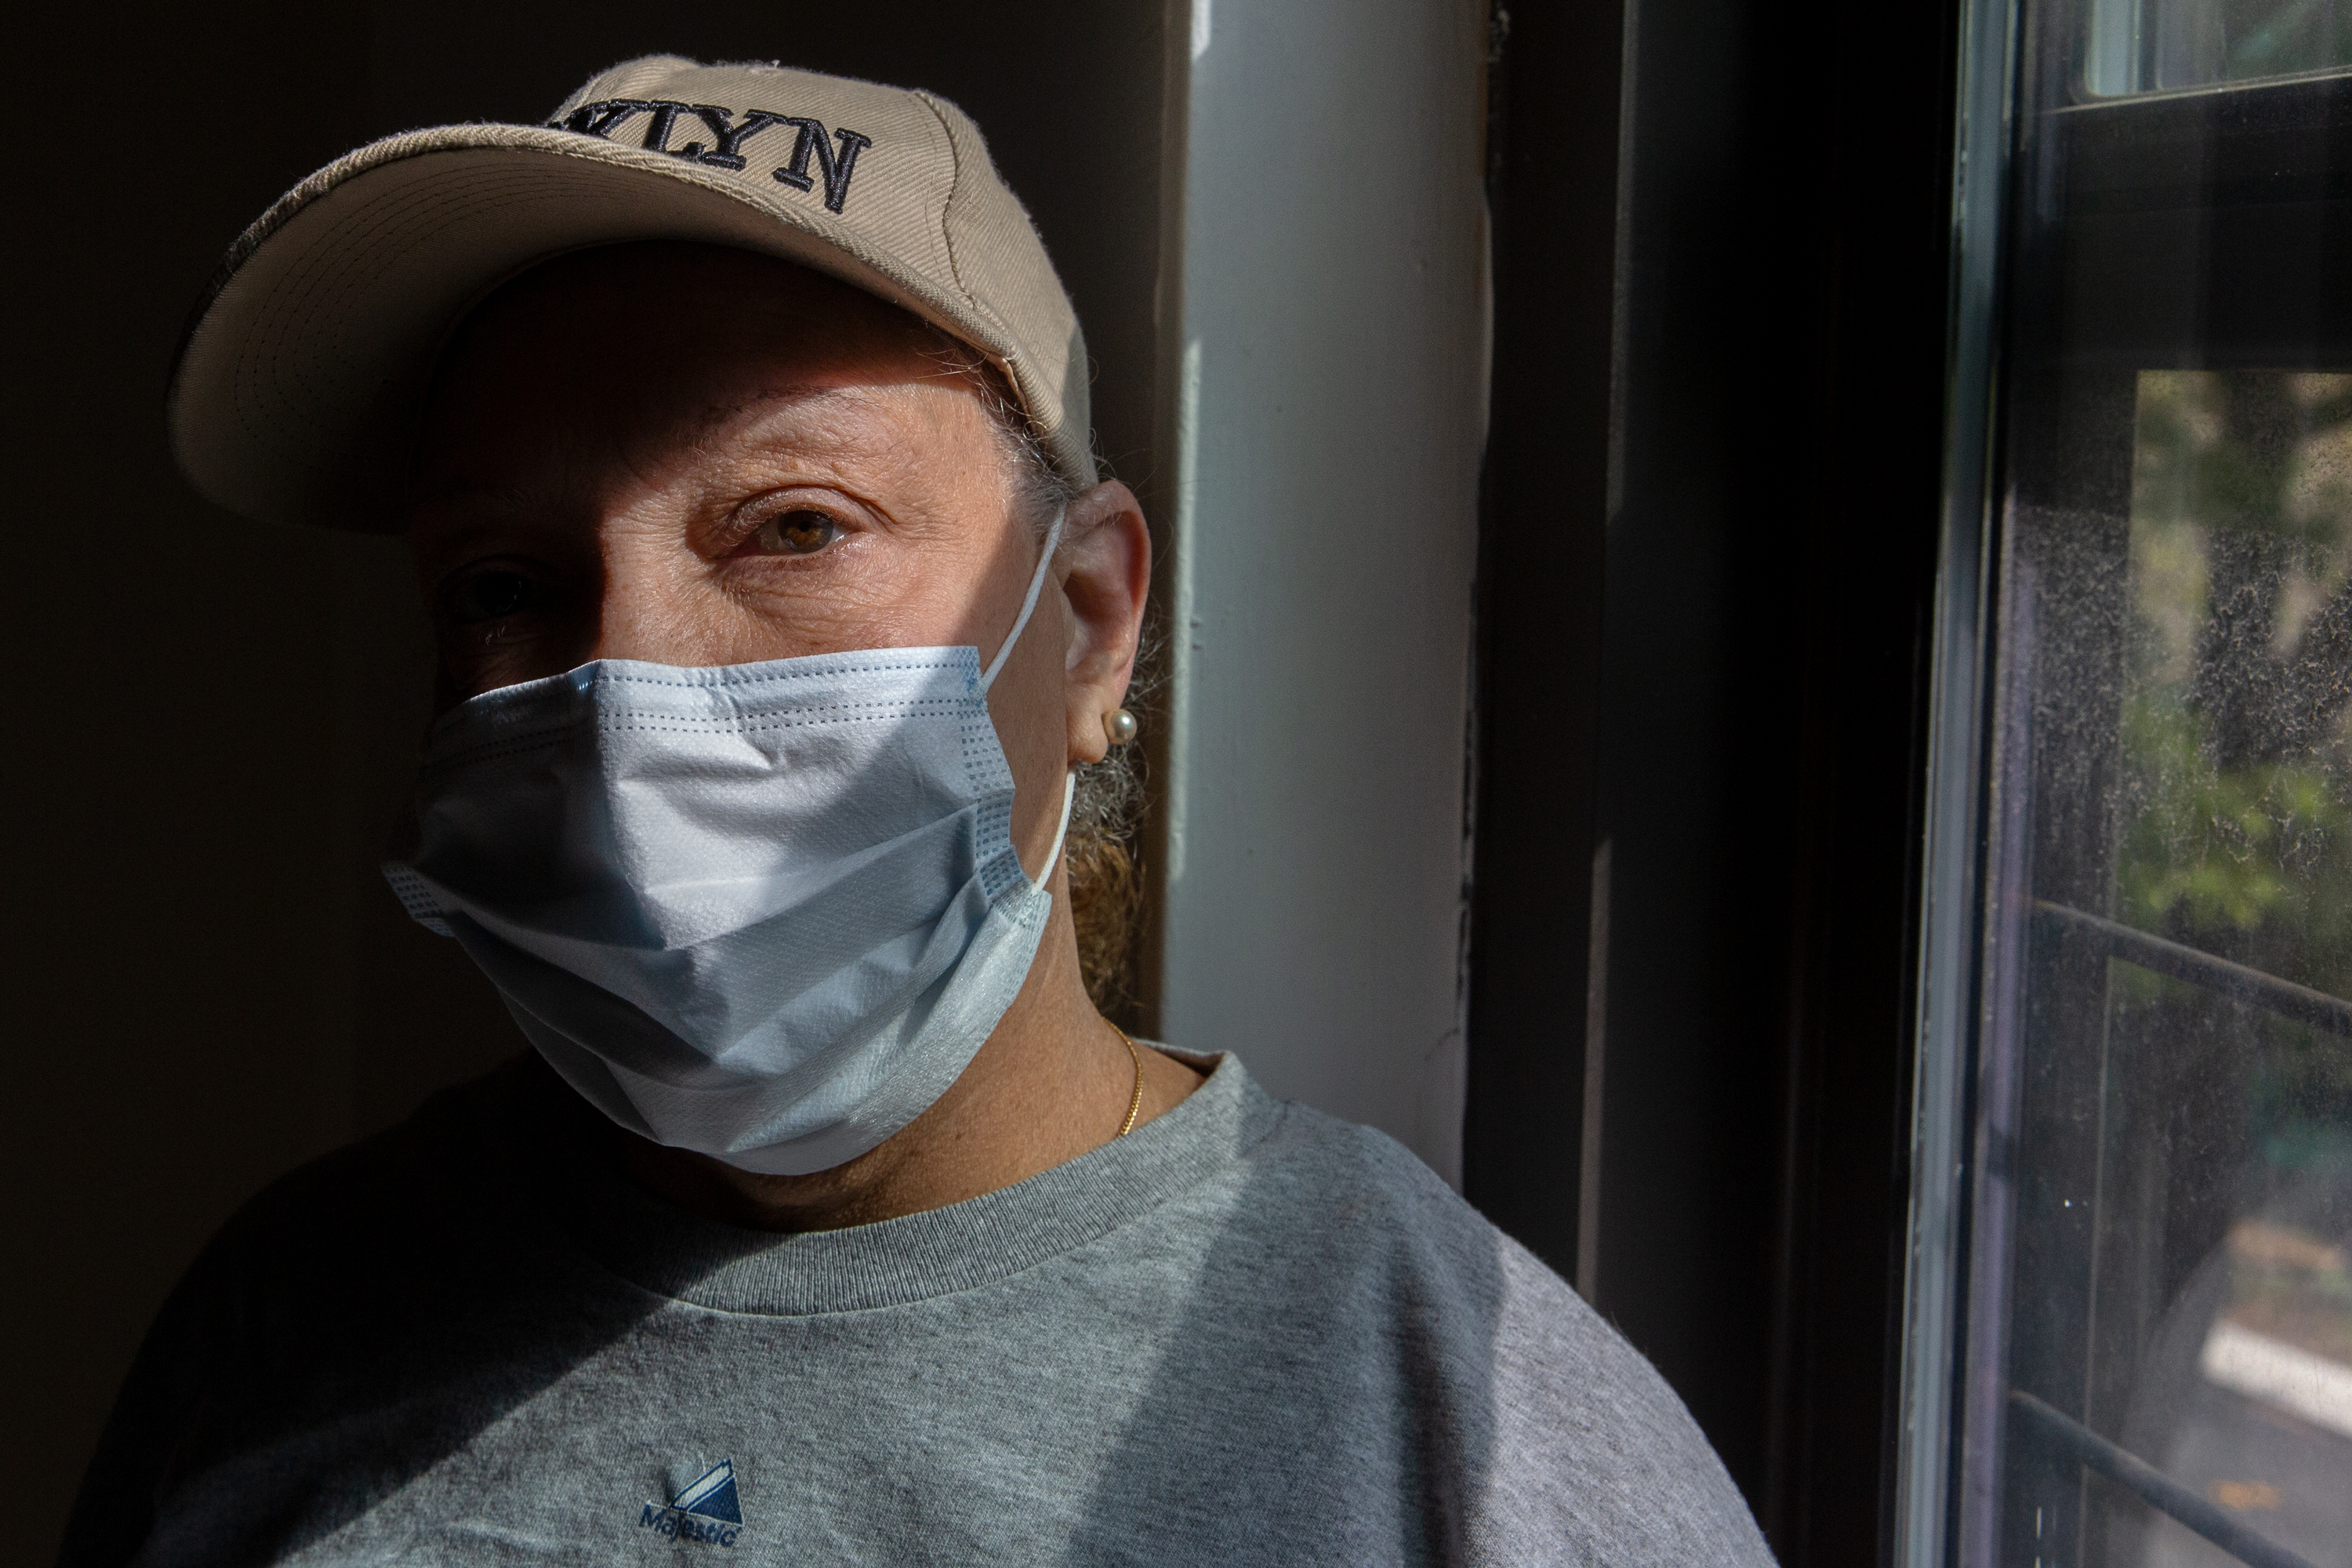 Patricia Vazquez says private managers have done shoddy repairs in her Williamsburg NYCHA apartment at 190 Marcy Ave., Sept. 21, 2021.